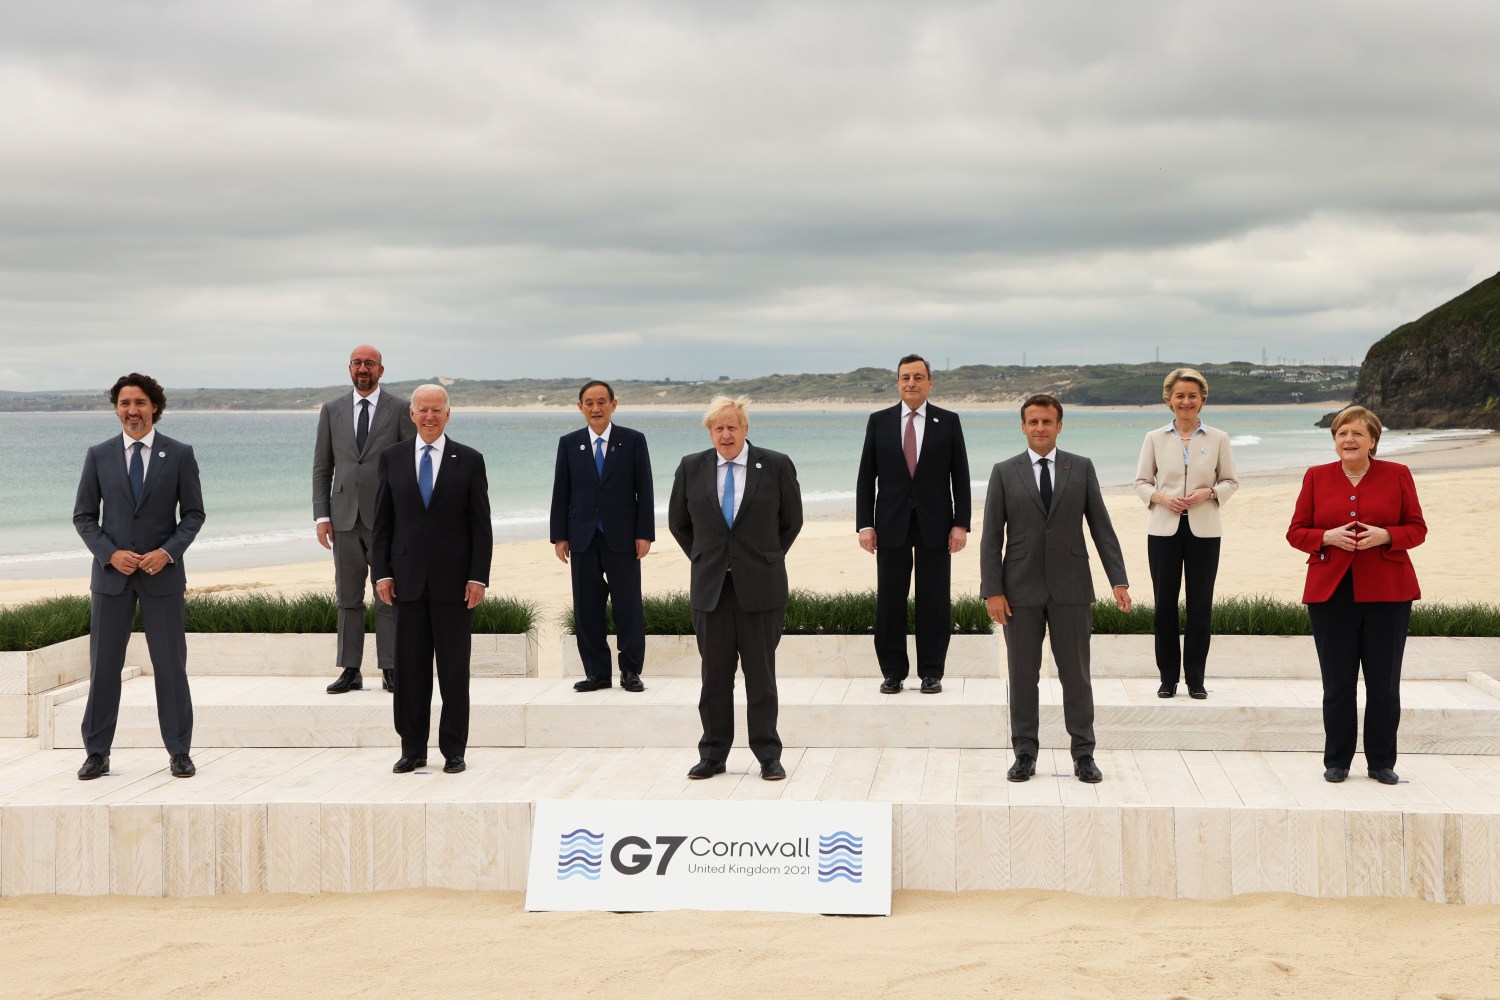 (L to R): Canada's Prime Minister Justin Trudeau, European Council President Charles Michel, U.S. President Joe Biden, Japan's Prime Minister Yoshihide Suga, Britain's Prime Minister Boris Johnson, Italy's Prime Minister Mario Draghi, France's President Emmanuel Macron, European Commission President Ursula von der Leyen and Germany's Chancellor Angela Merkel pose for a family photograph of the G7 summit in Carbis Bay, Cornwall, England on June 11, 2021. ( The Yomiuri Shimbun )